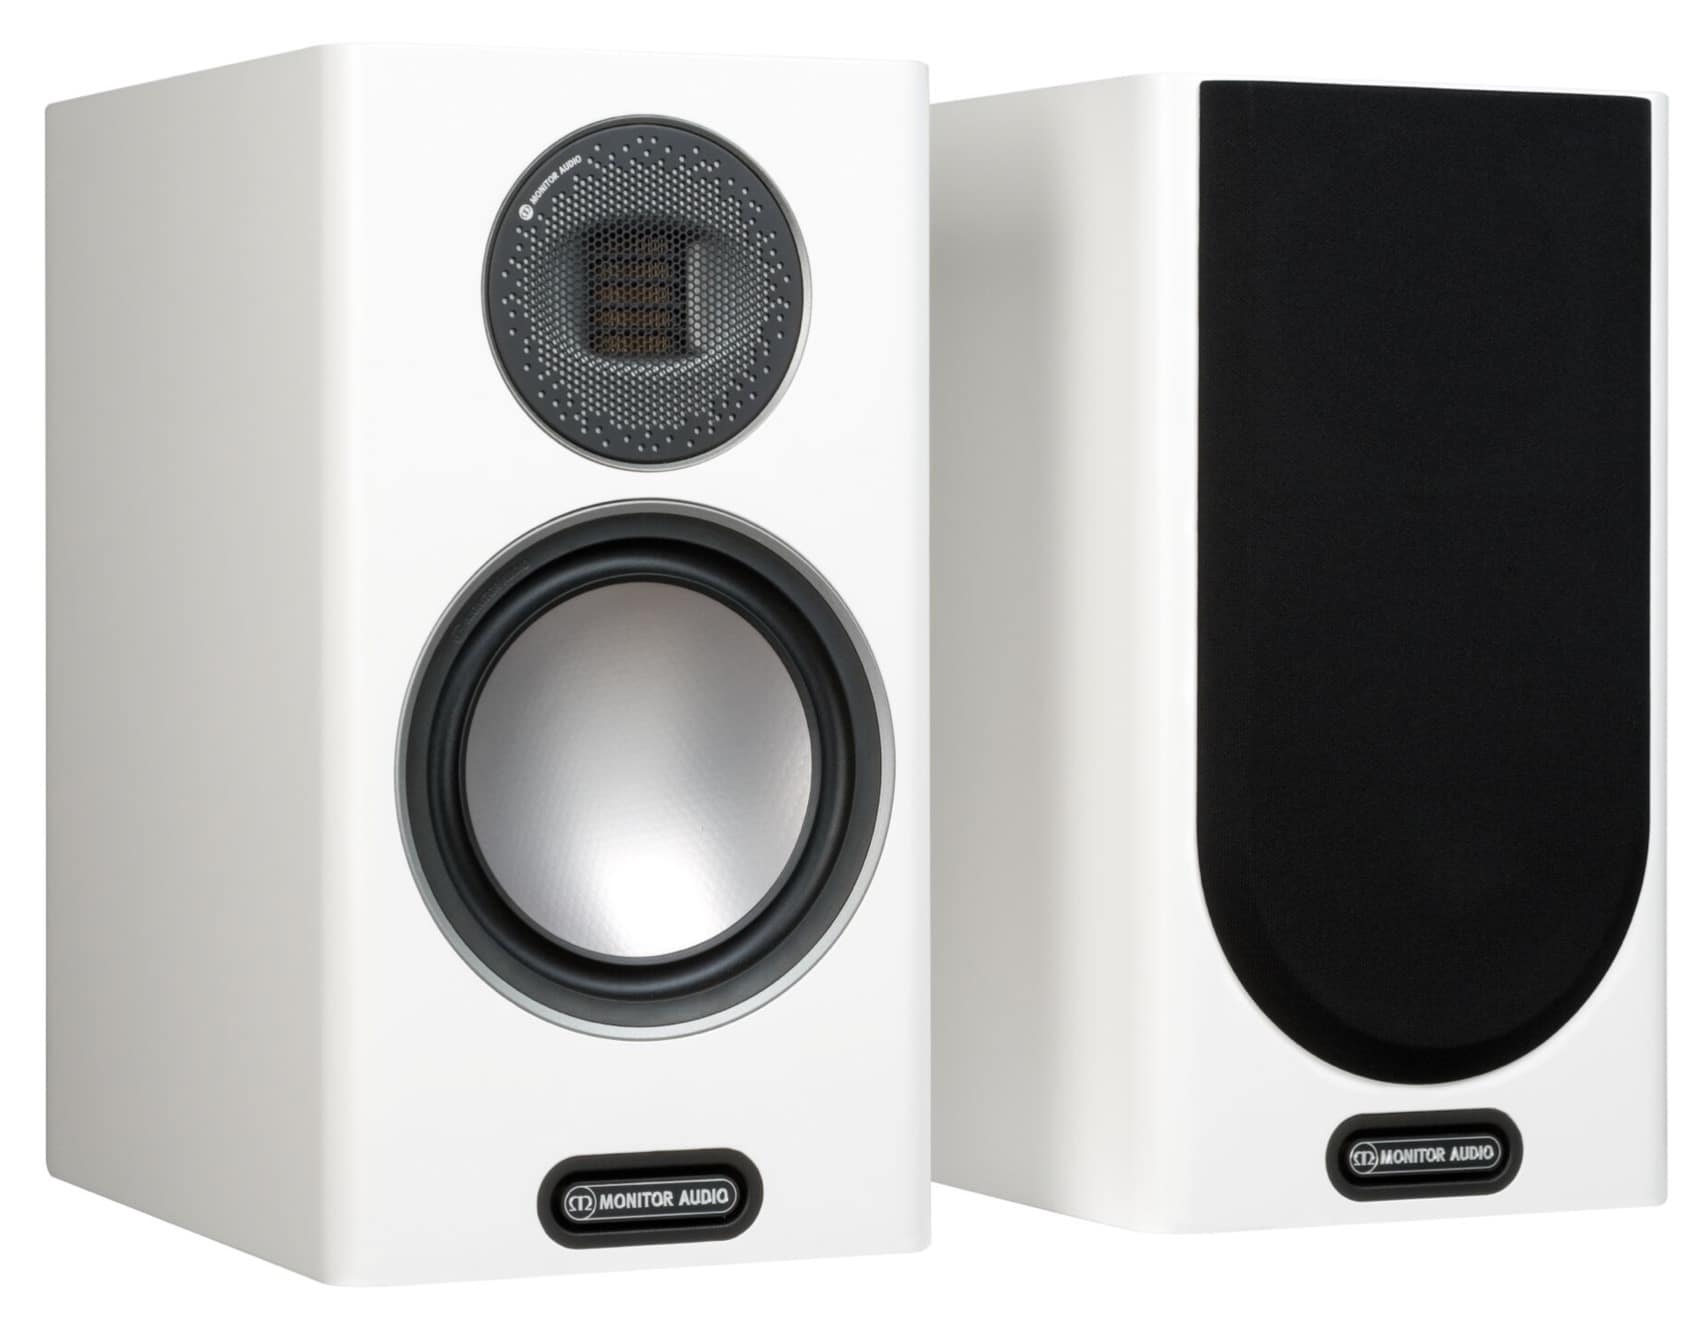 Gold Series Speakers From Monitor Audio